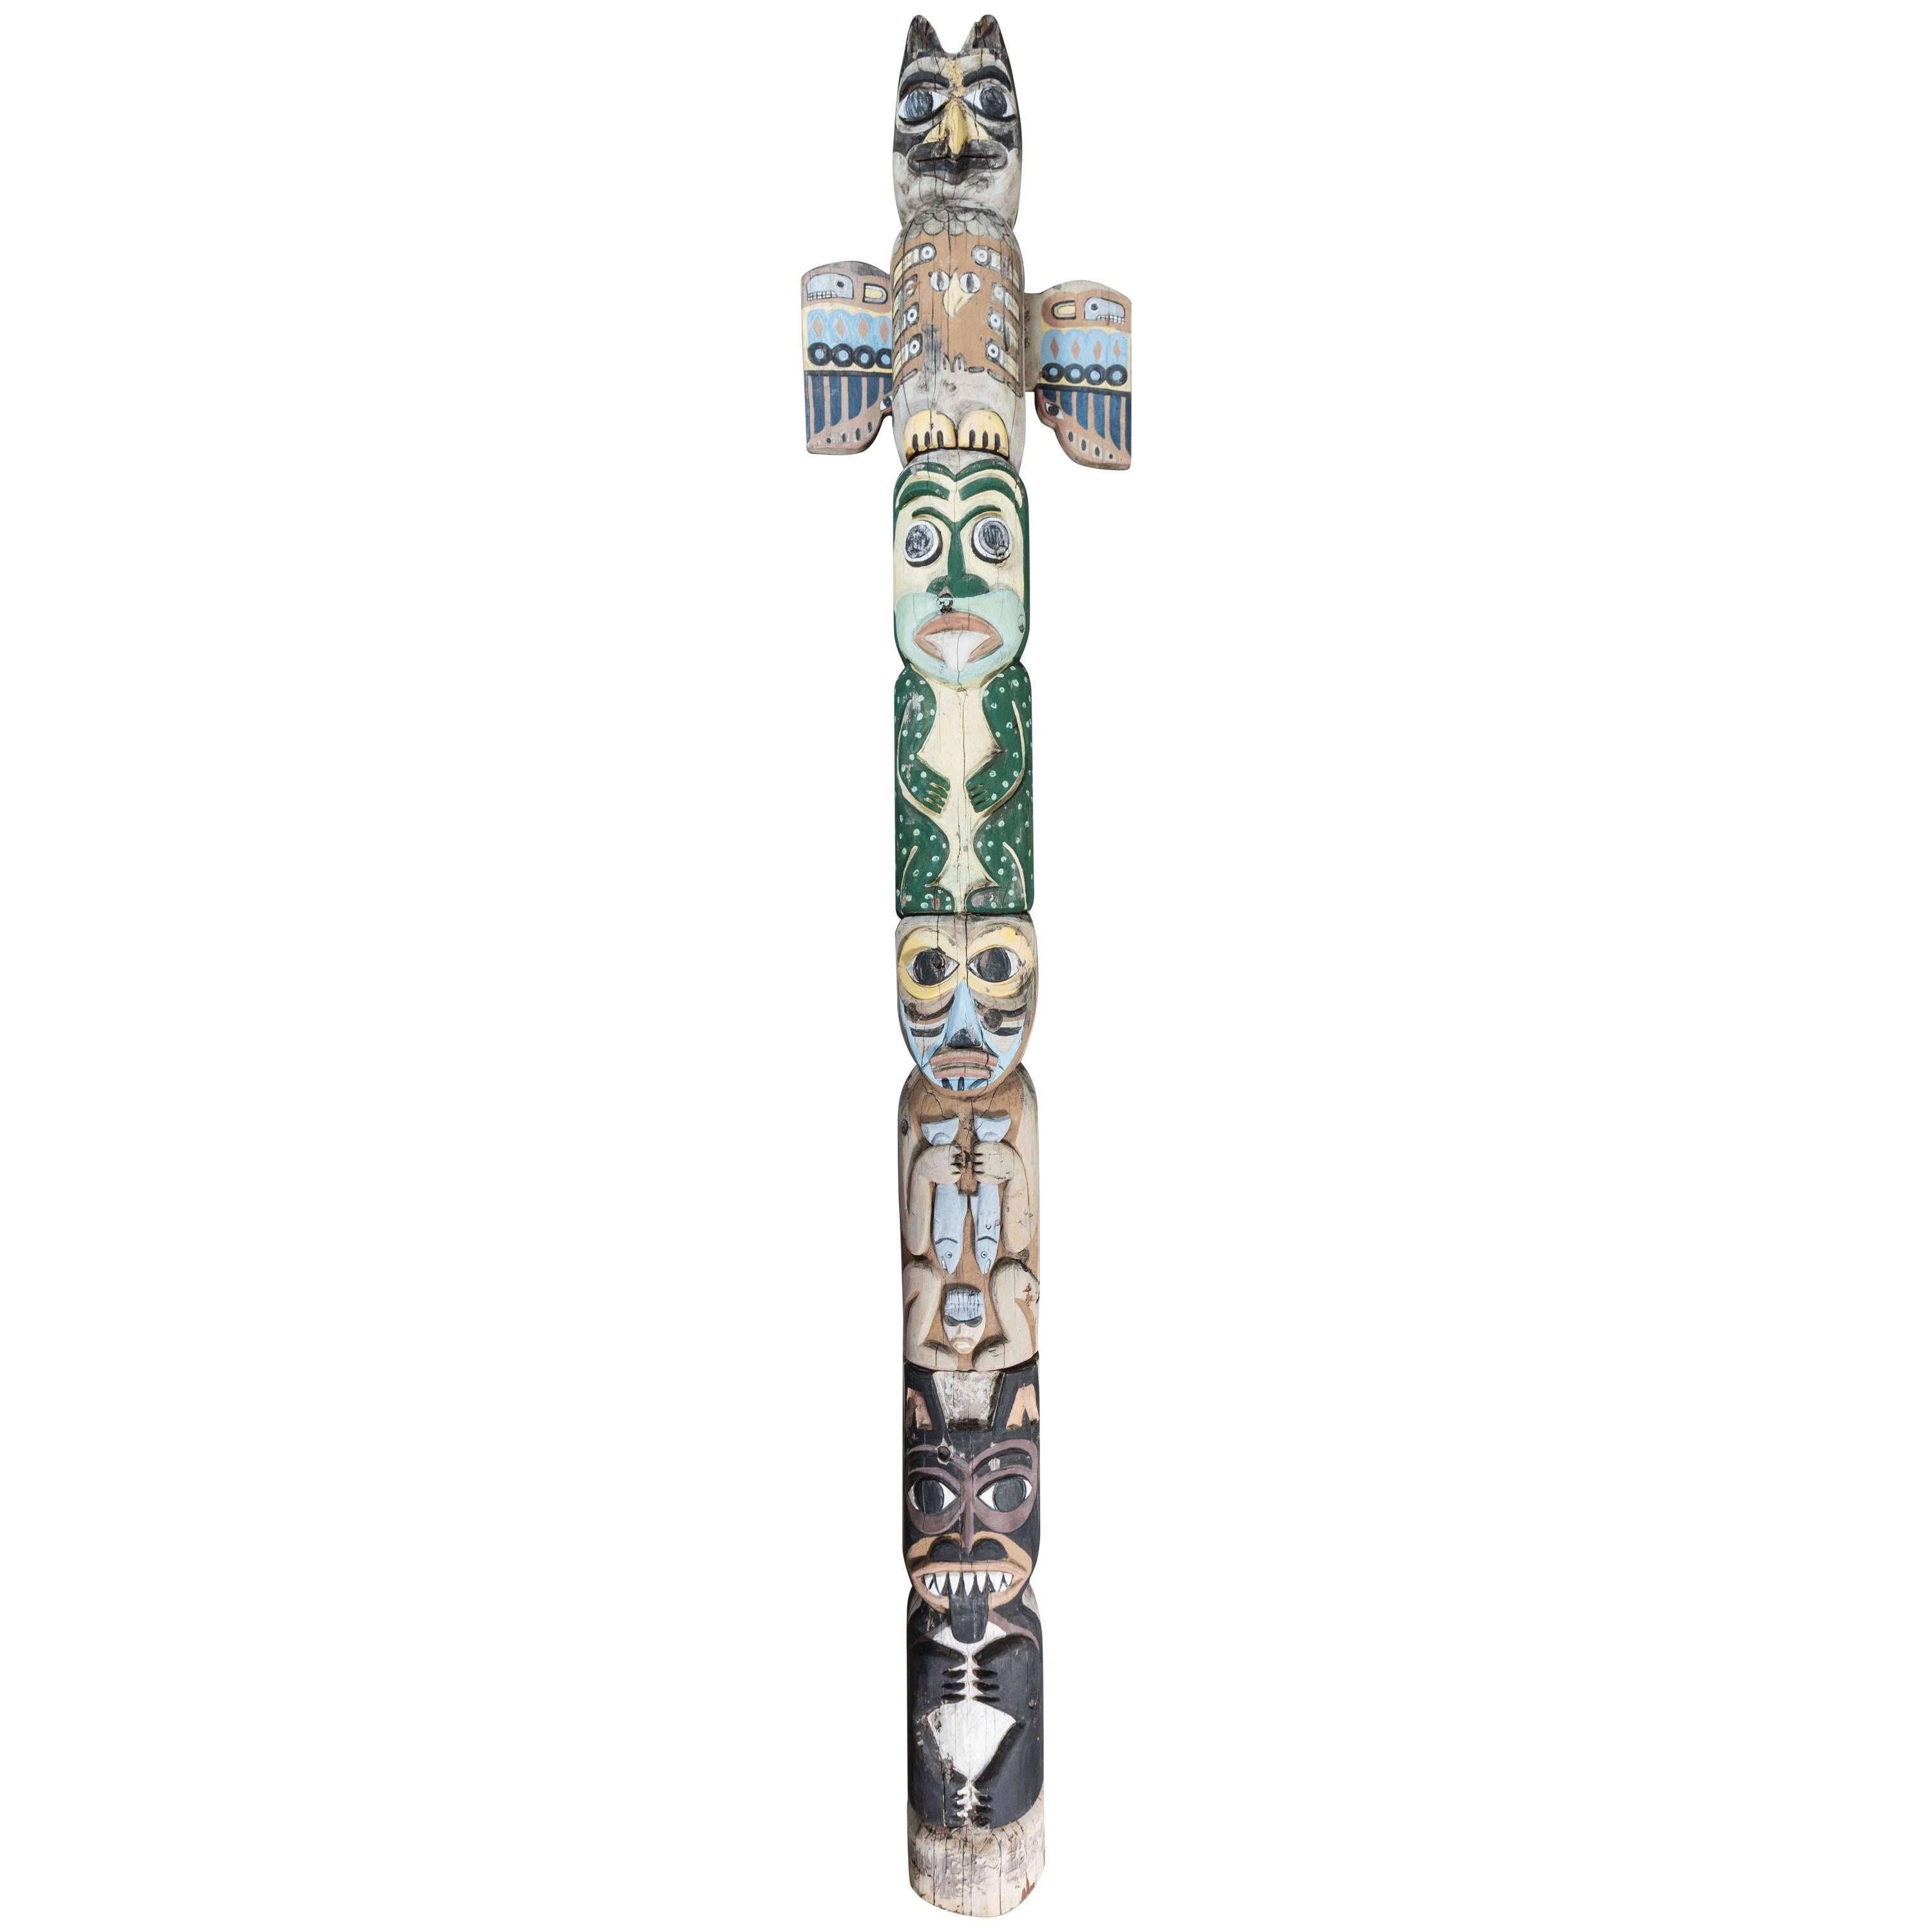 Native American Animal Mythical Creature Redwood Totem Pole For Sale at  1stDibs | indian totem pole for sale, native american totem pole for sale,  redwood pole